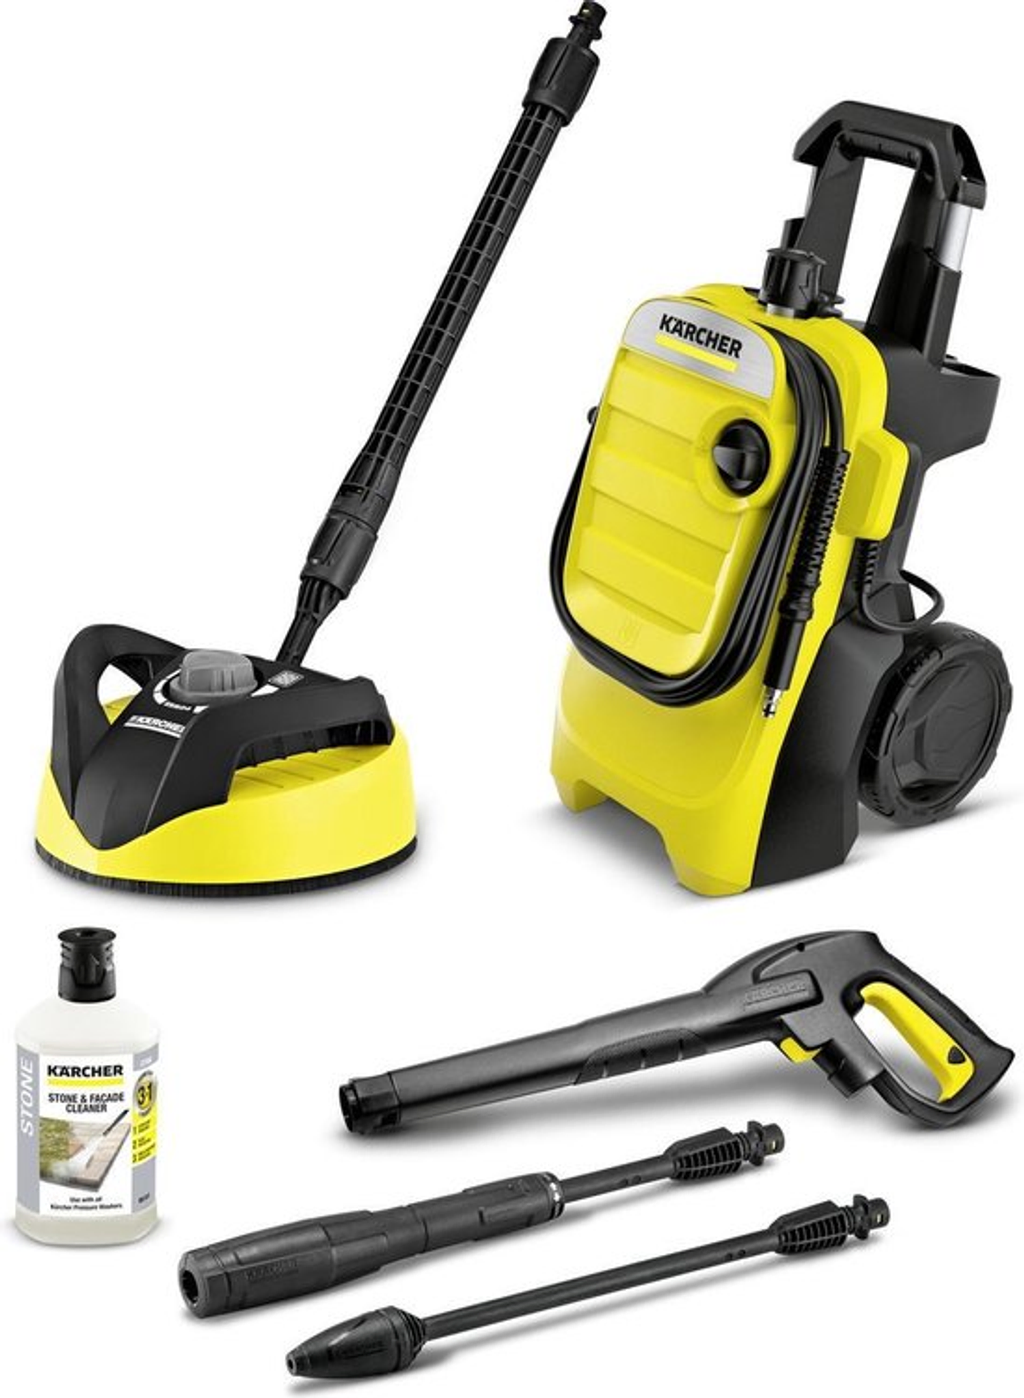 Rent this Kärcher K 4 Compact pressure washer with T-Racer patio cleaner with BIYU 